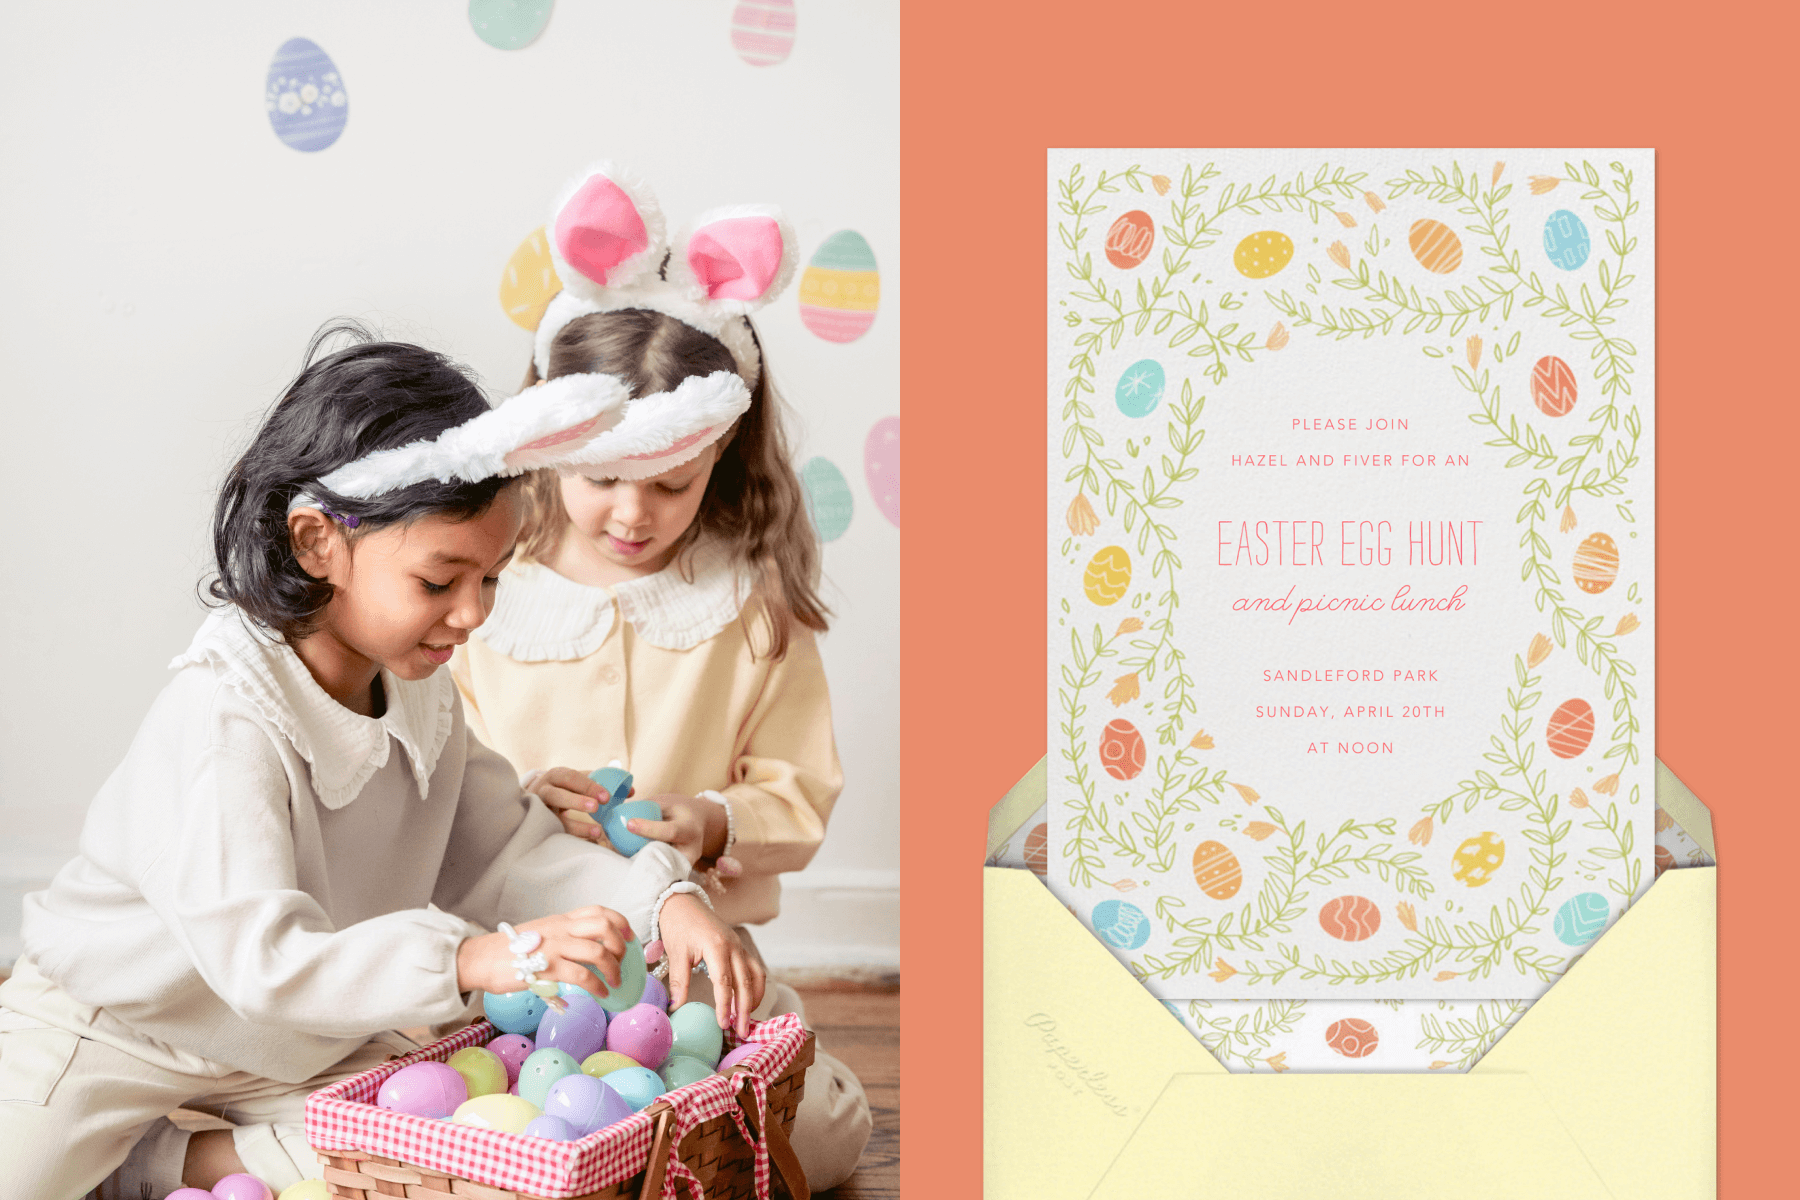 Left: Two children wearing bunny ears collect colorful plastic eggs. Right: An Easter invitation with illustrated dyed eggs and greenery